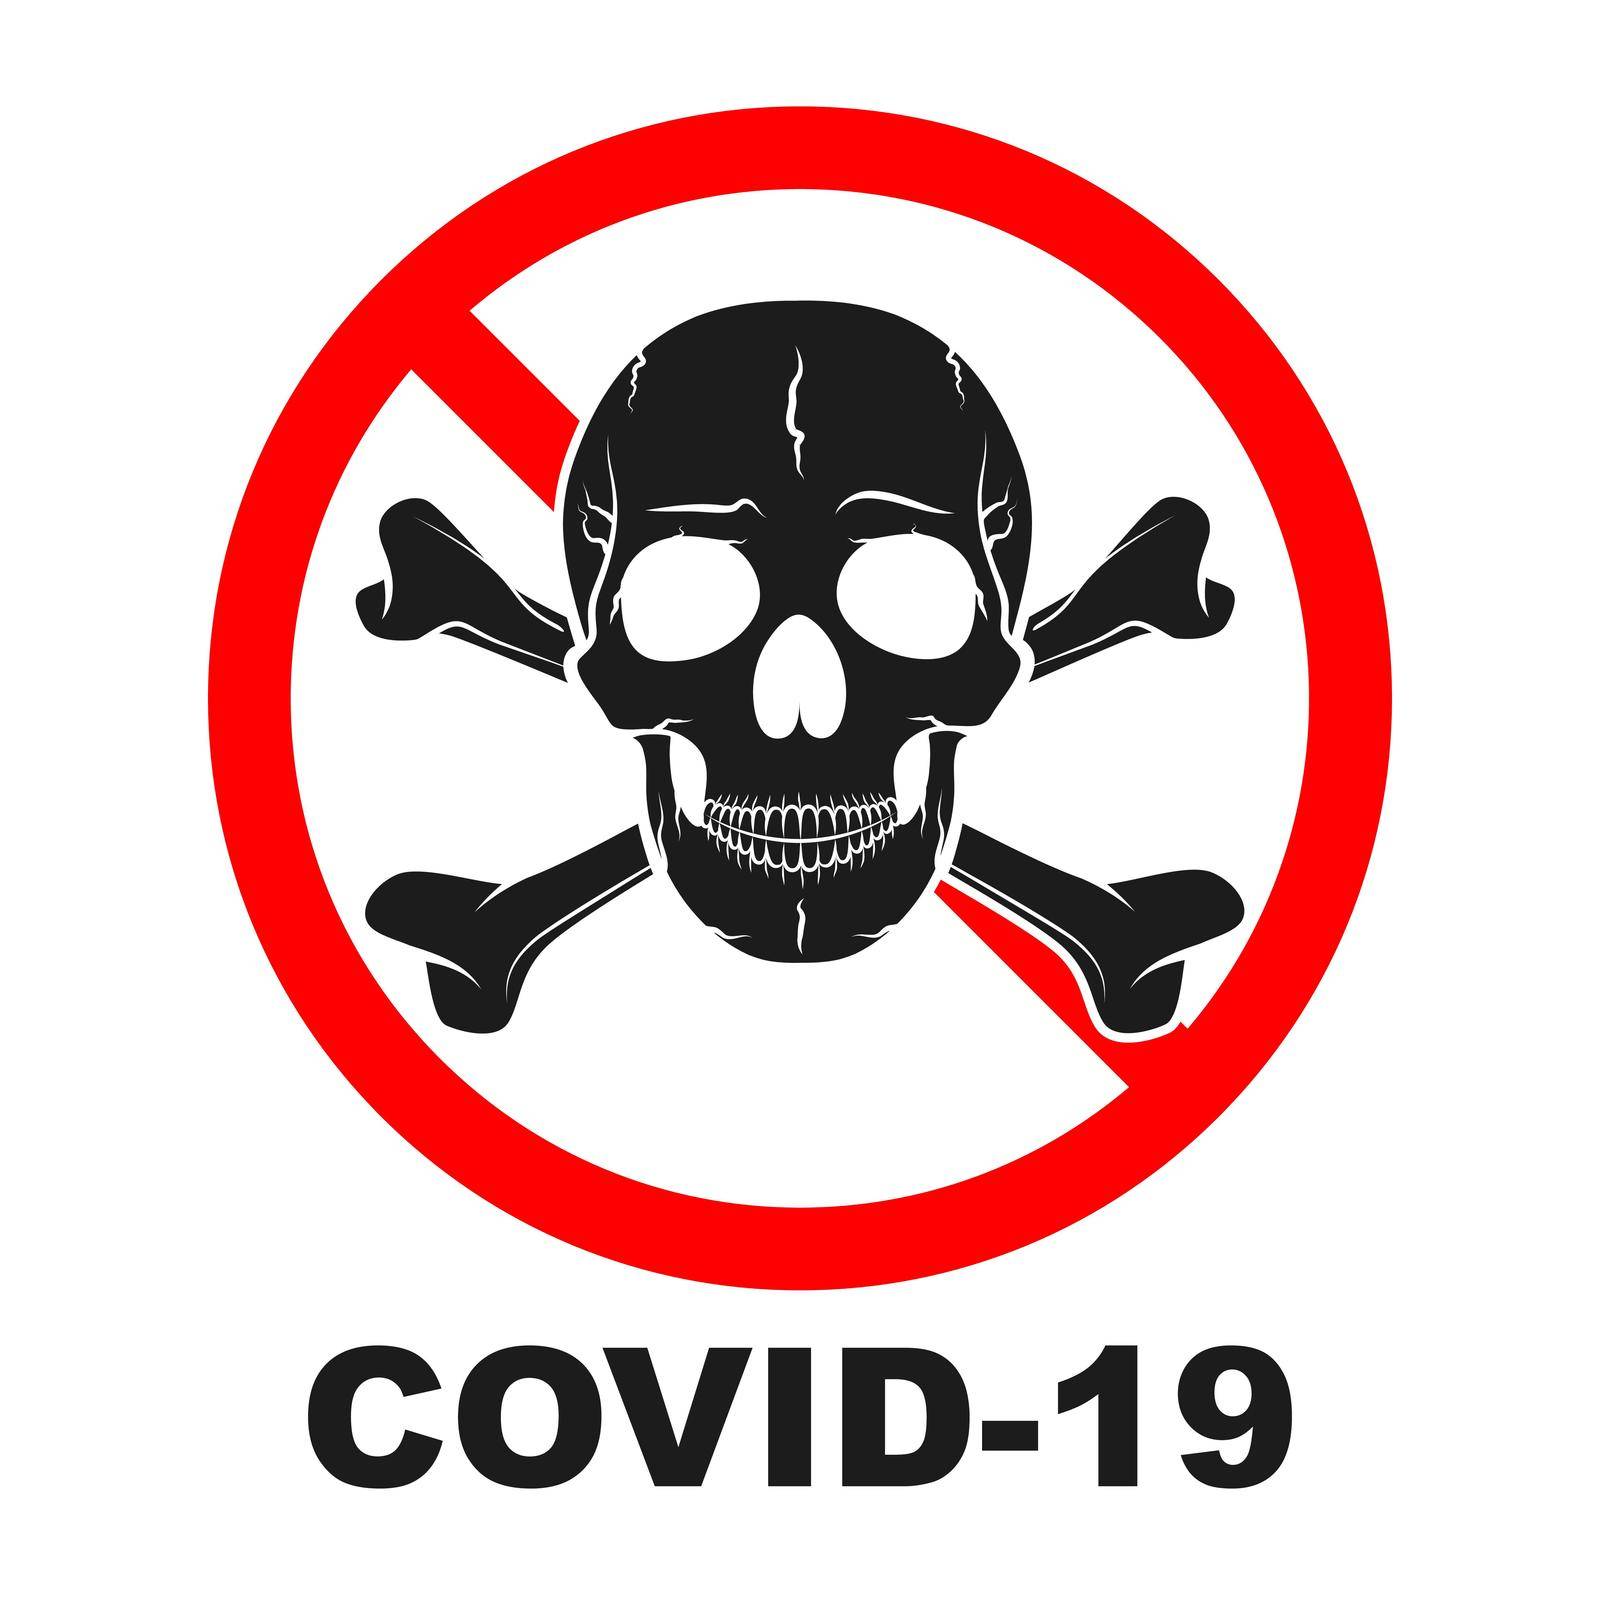 Stop coronavirus red sign with skull. No covid-19 by Chekman